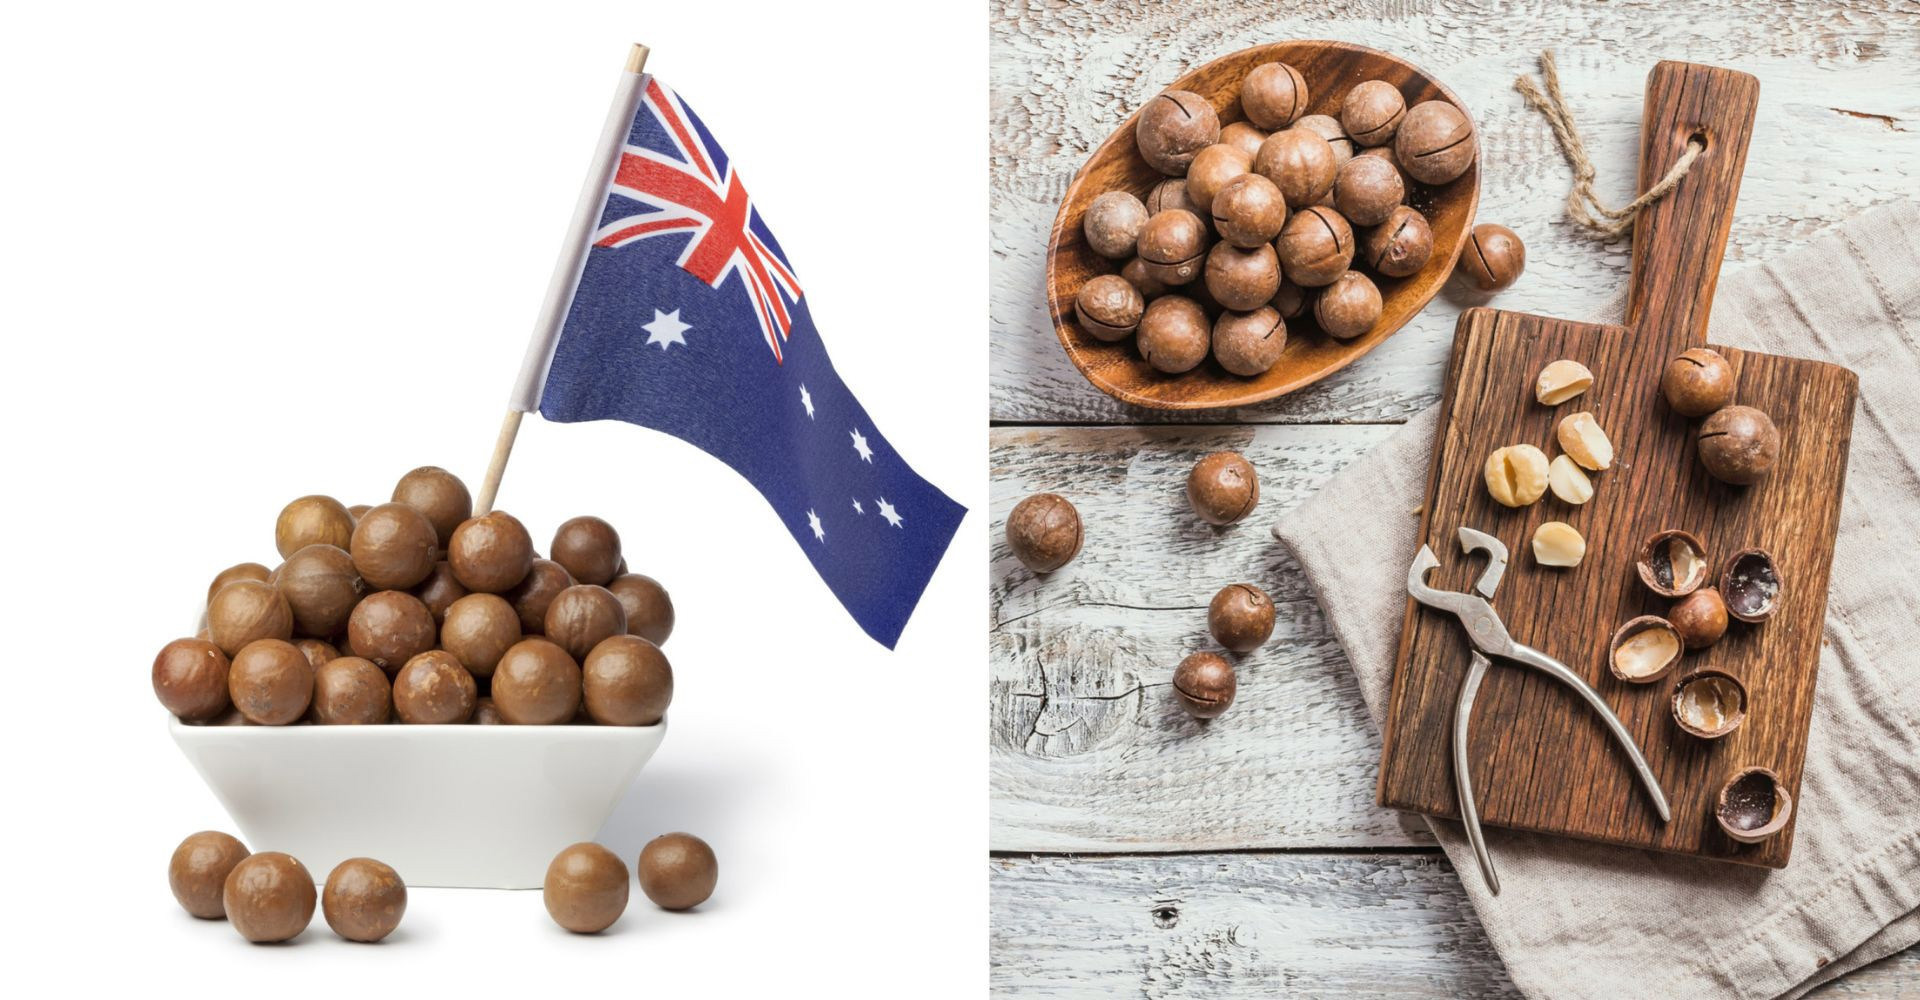 Cracking facts about macadamia nuts